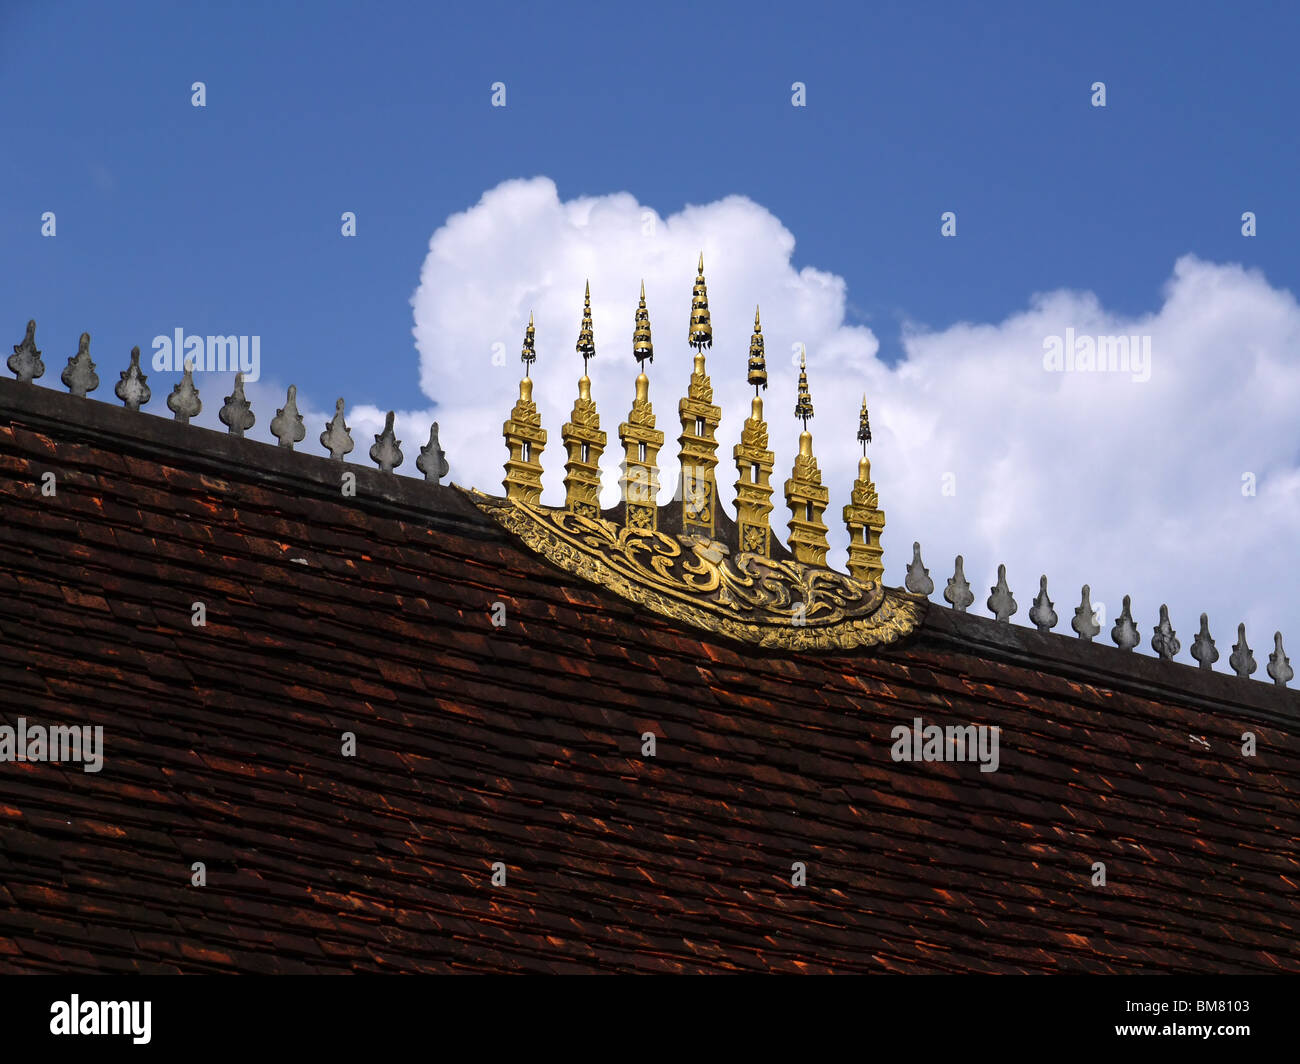 Decorated roof of buddhist temple in Luang Prabang, Northern Laos Stock Photo